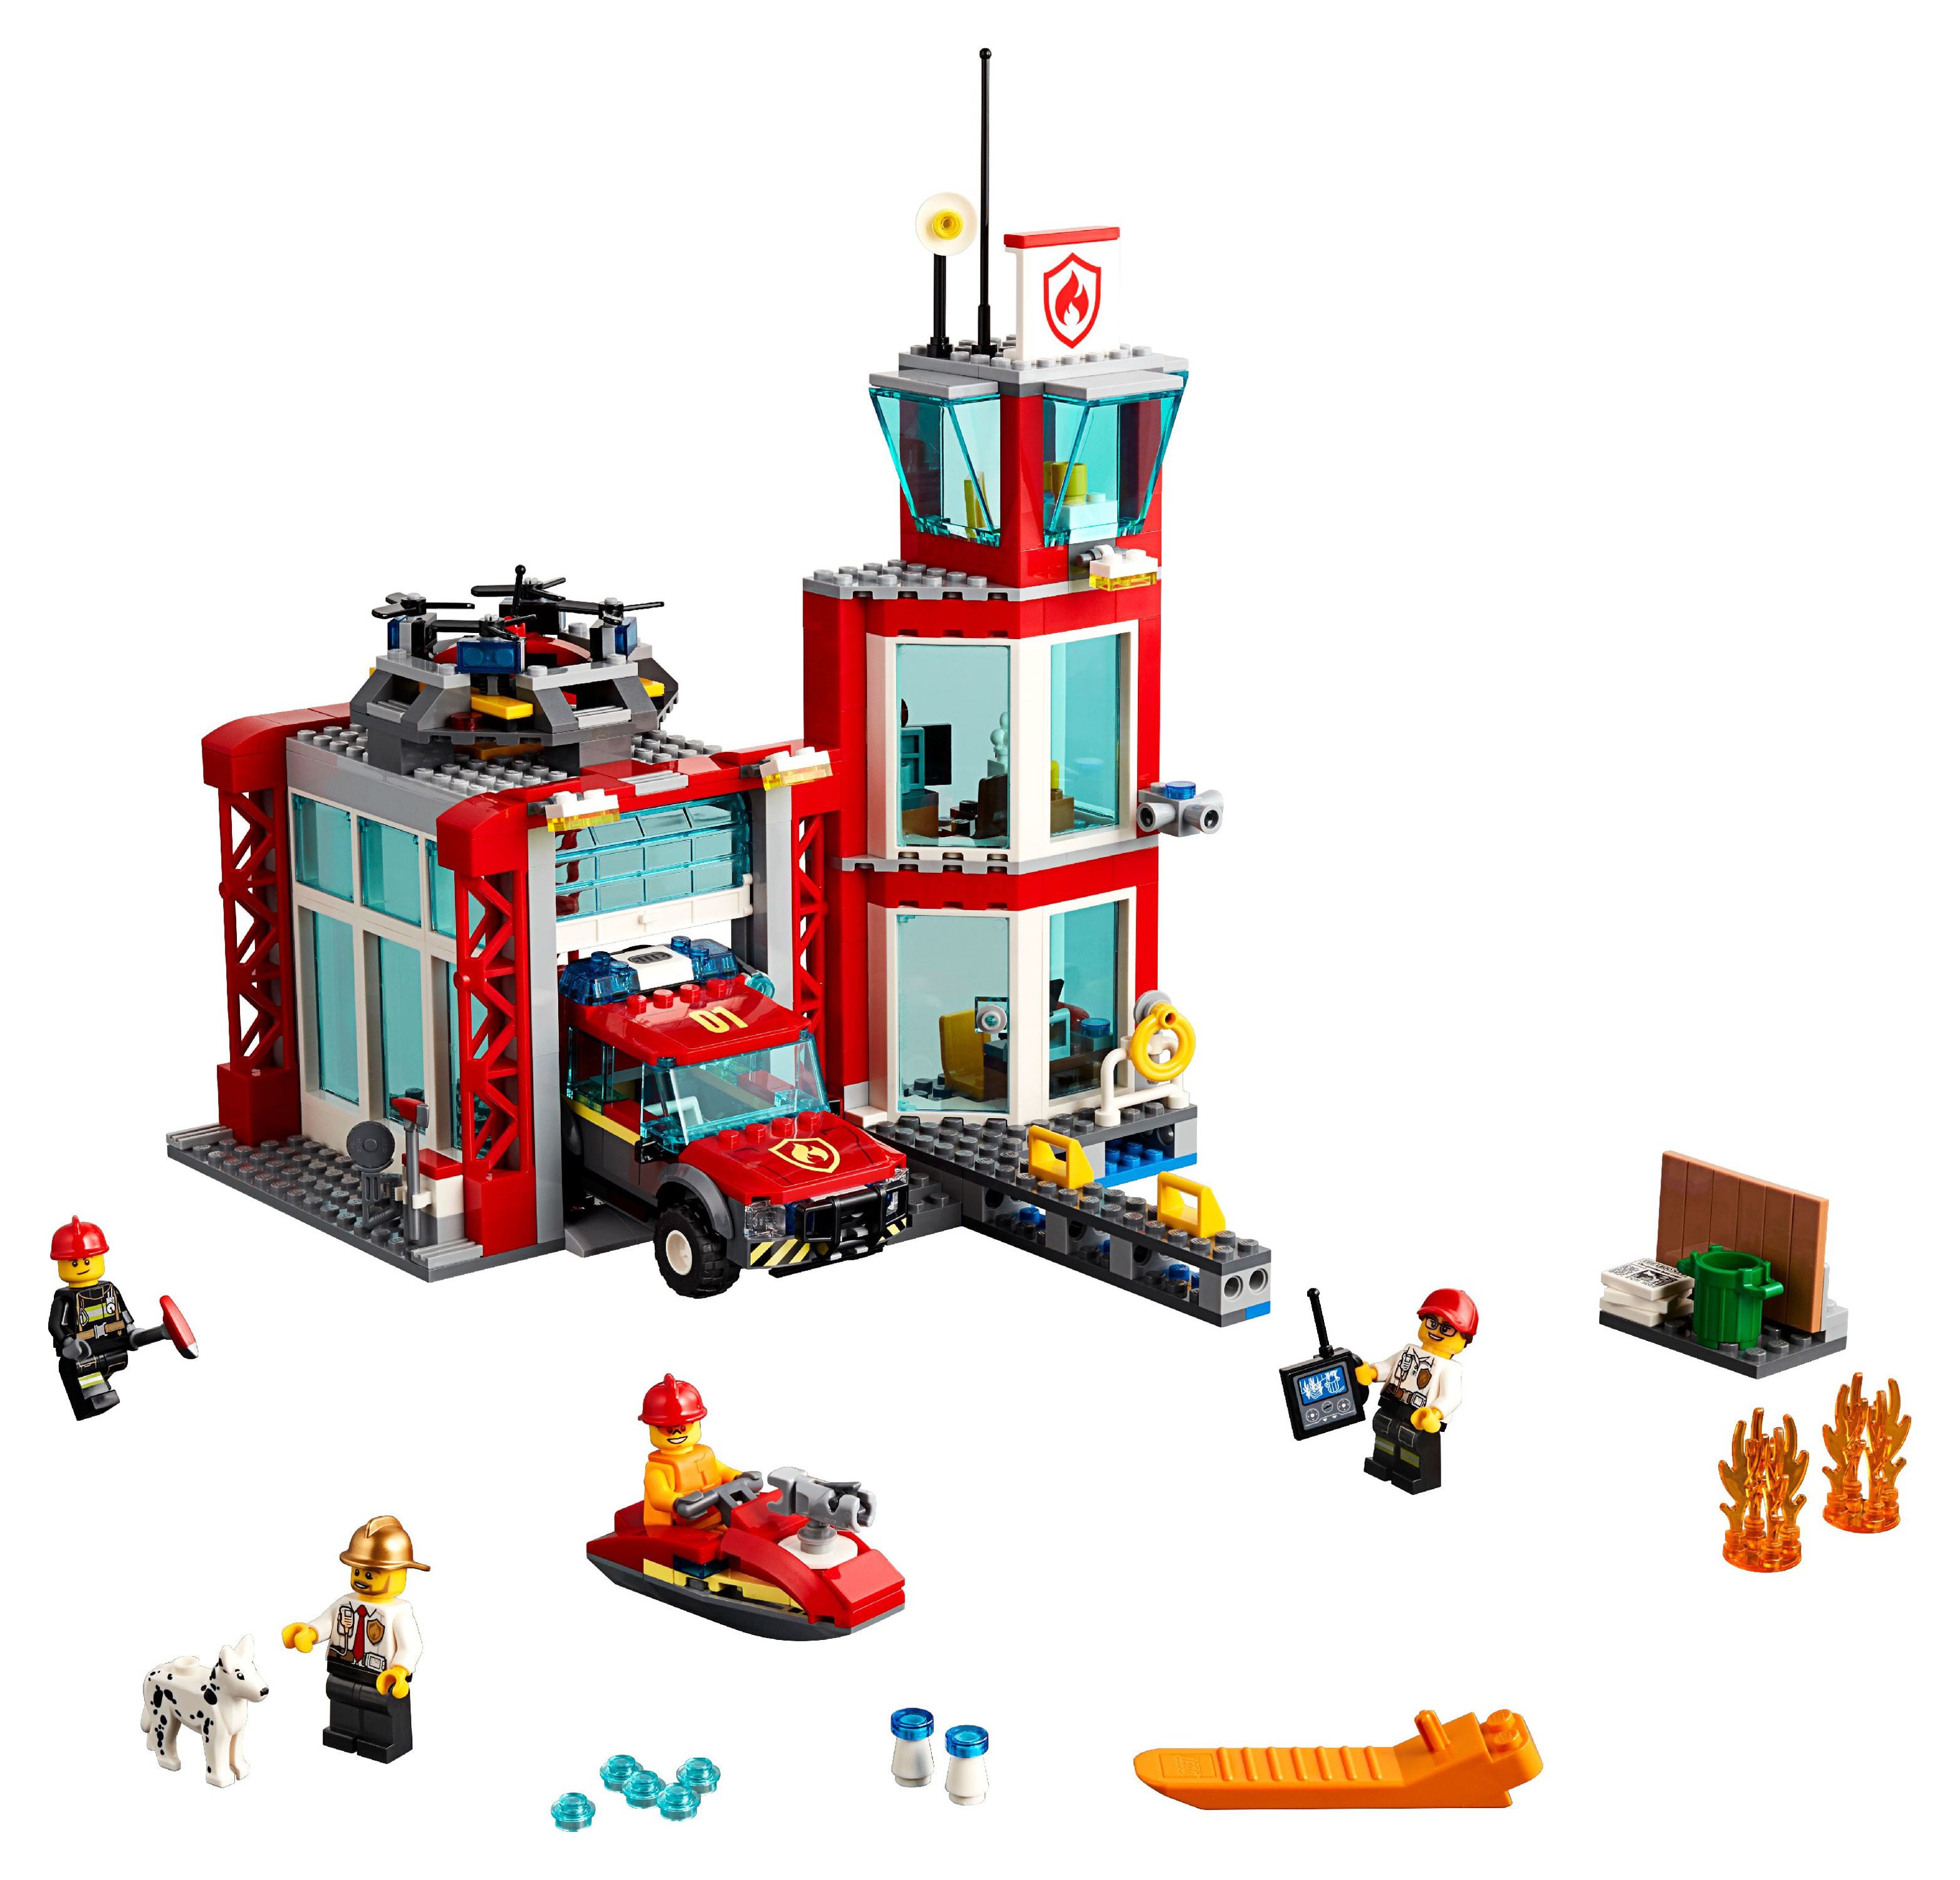 LEGO City Fire Fire Station 60215 Building Set (509 Pieces) - image 3 of 8